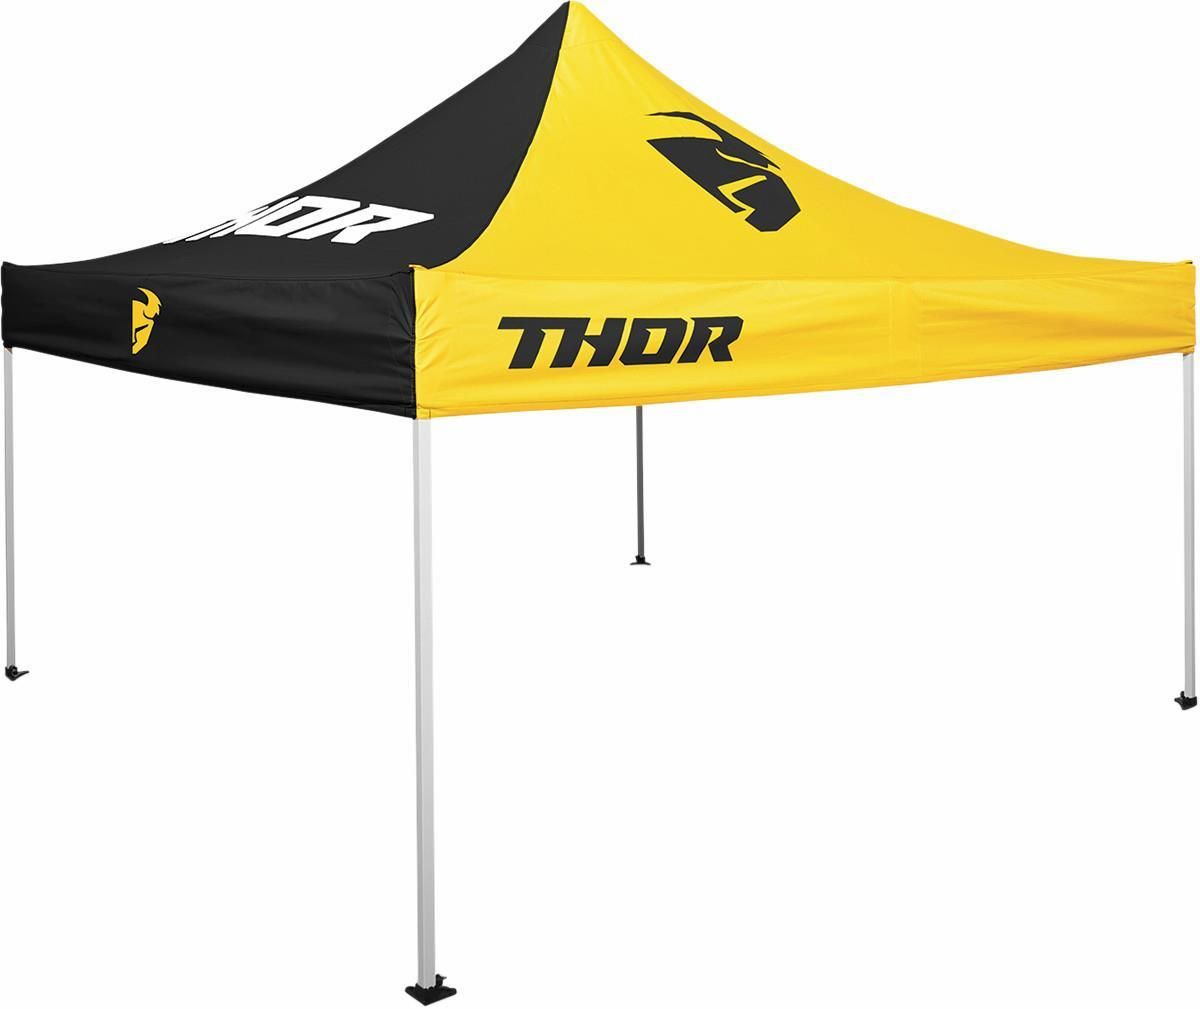 2ZCP-THOR-40300026 Track Canopy - Black Yellow